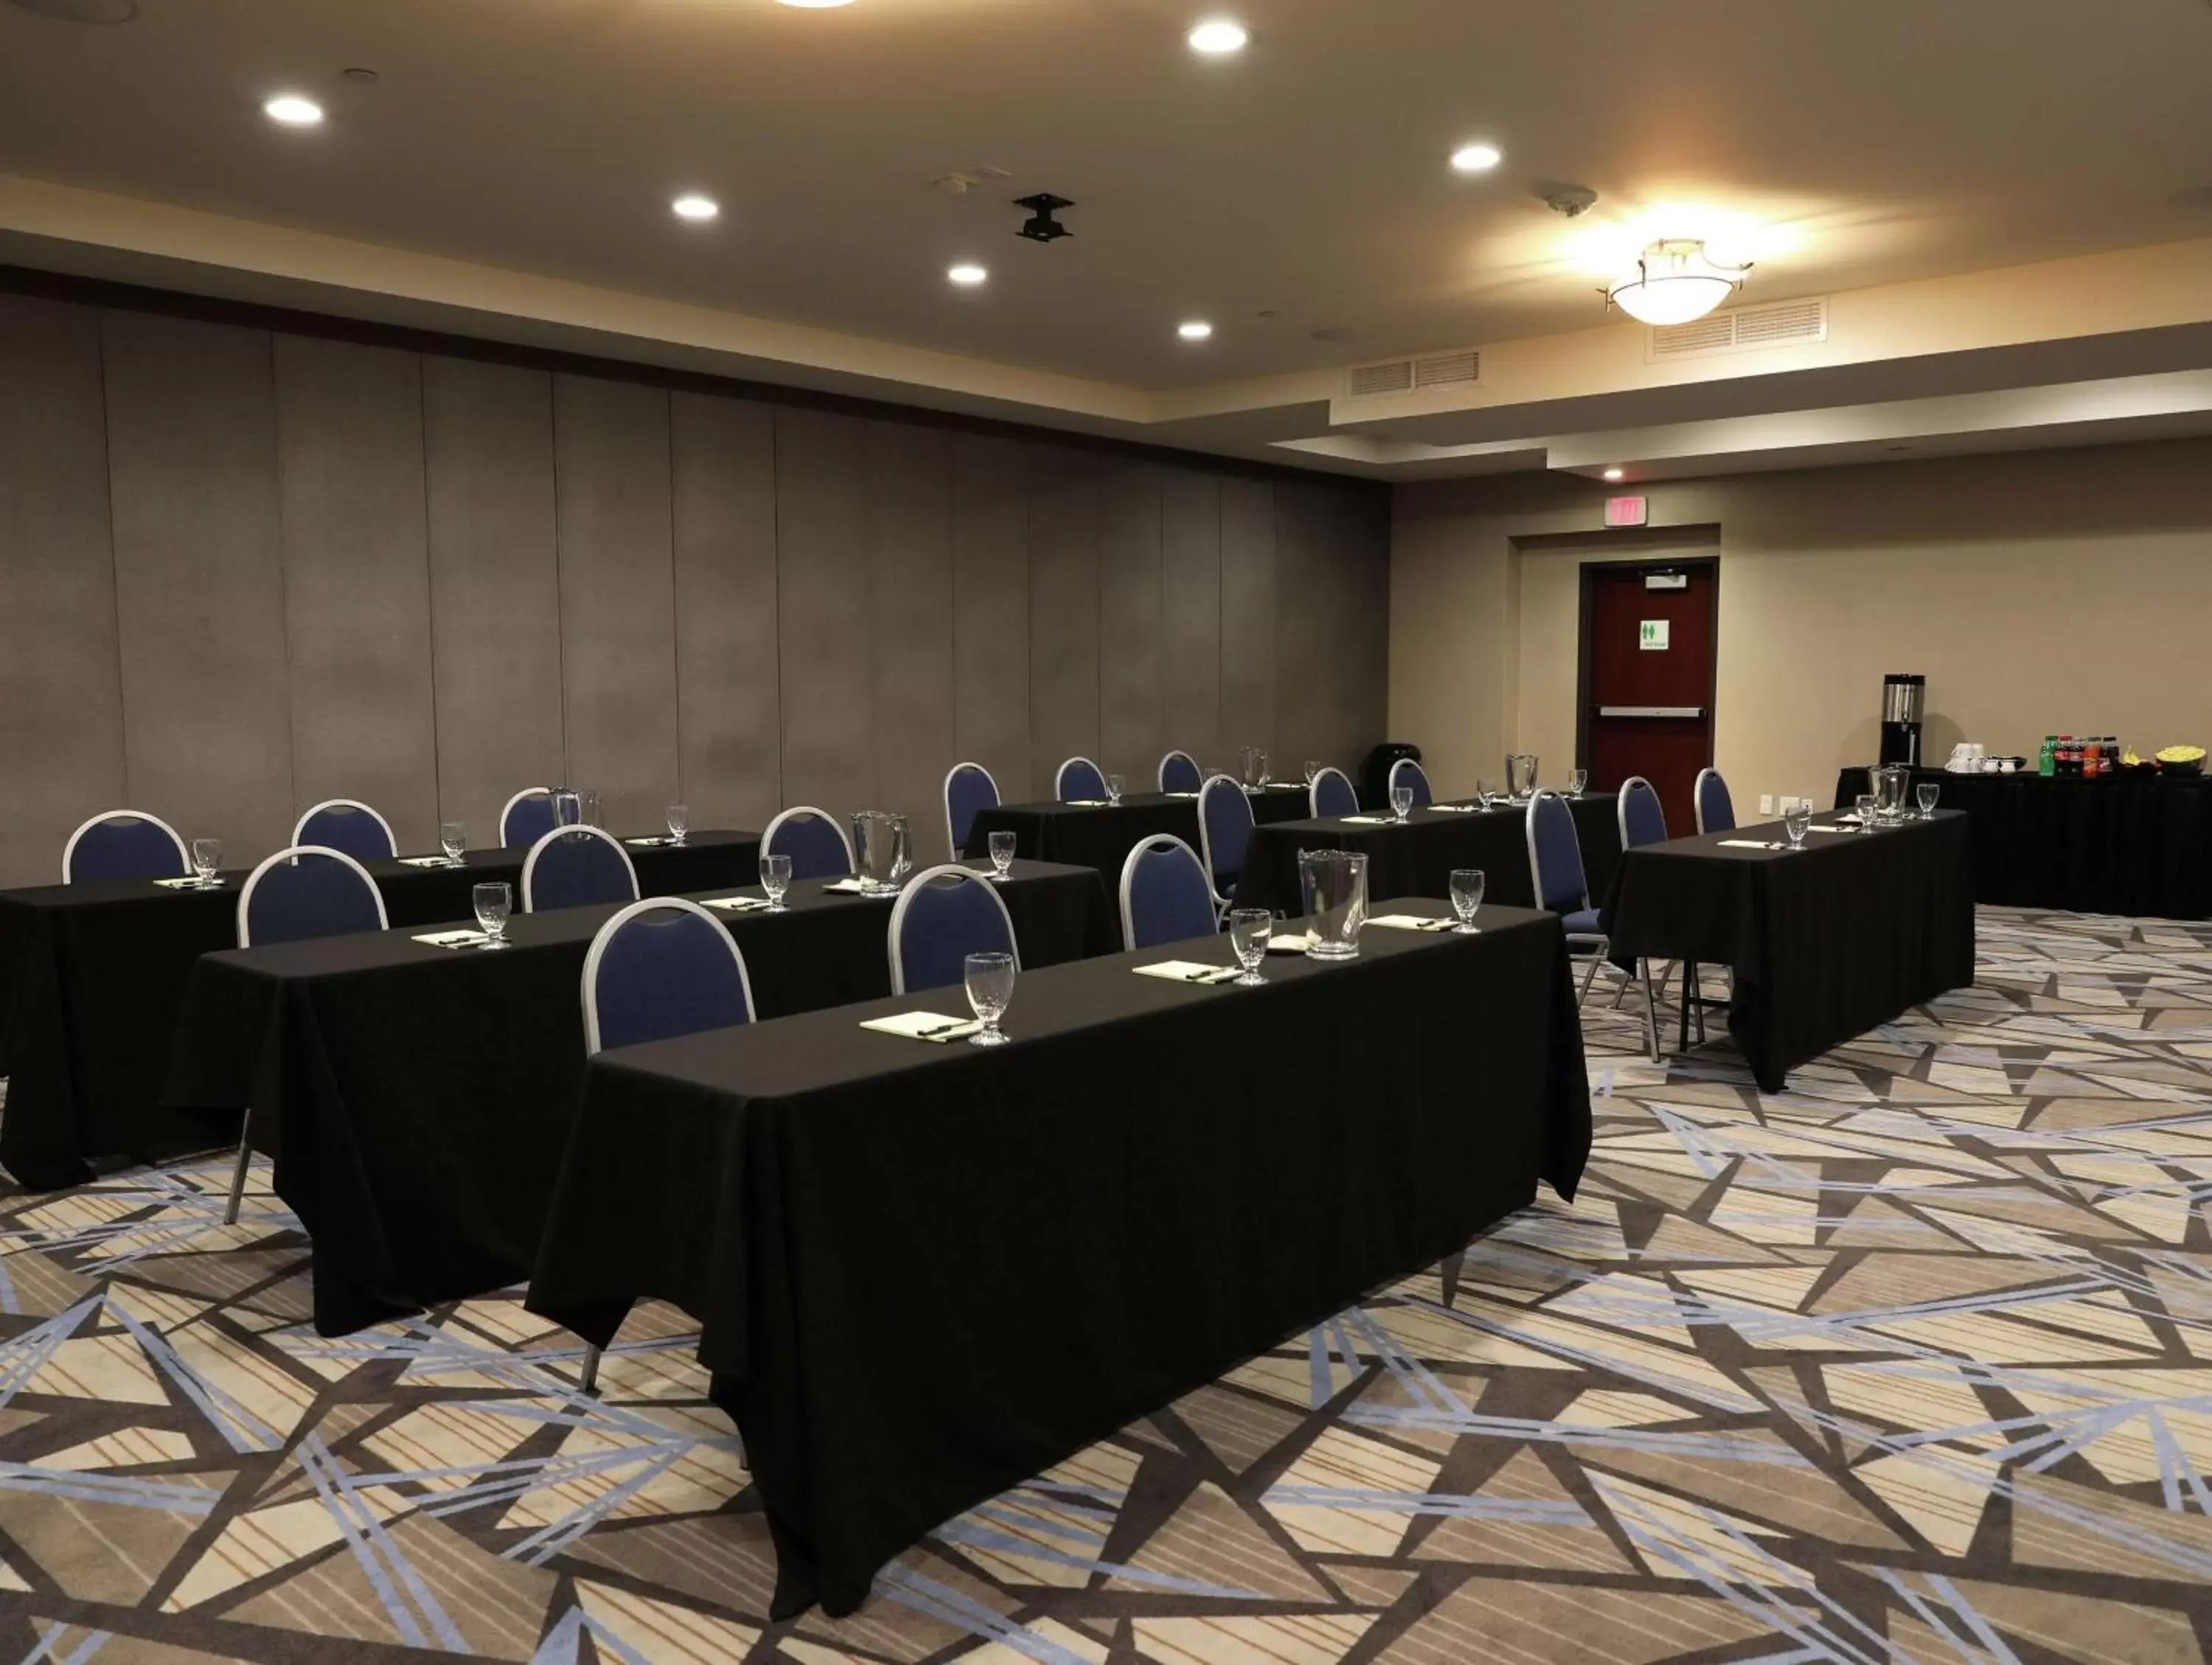 Meeting/conference room in Doubletree By Hilton Omaha Southwest, Ne